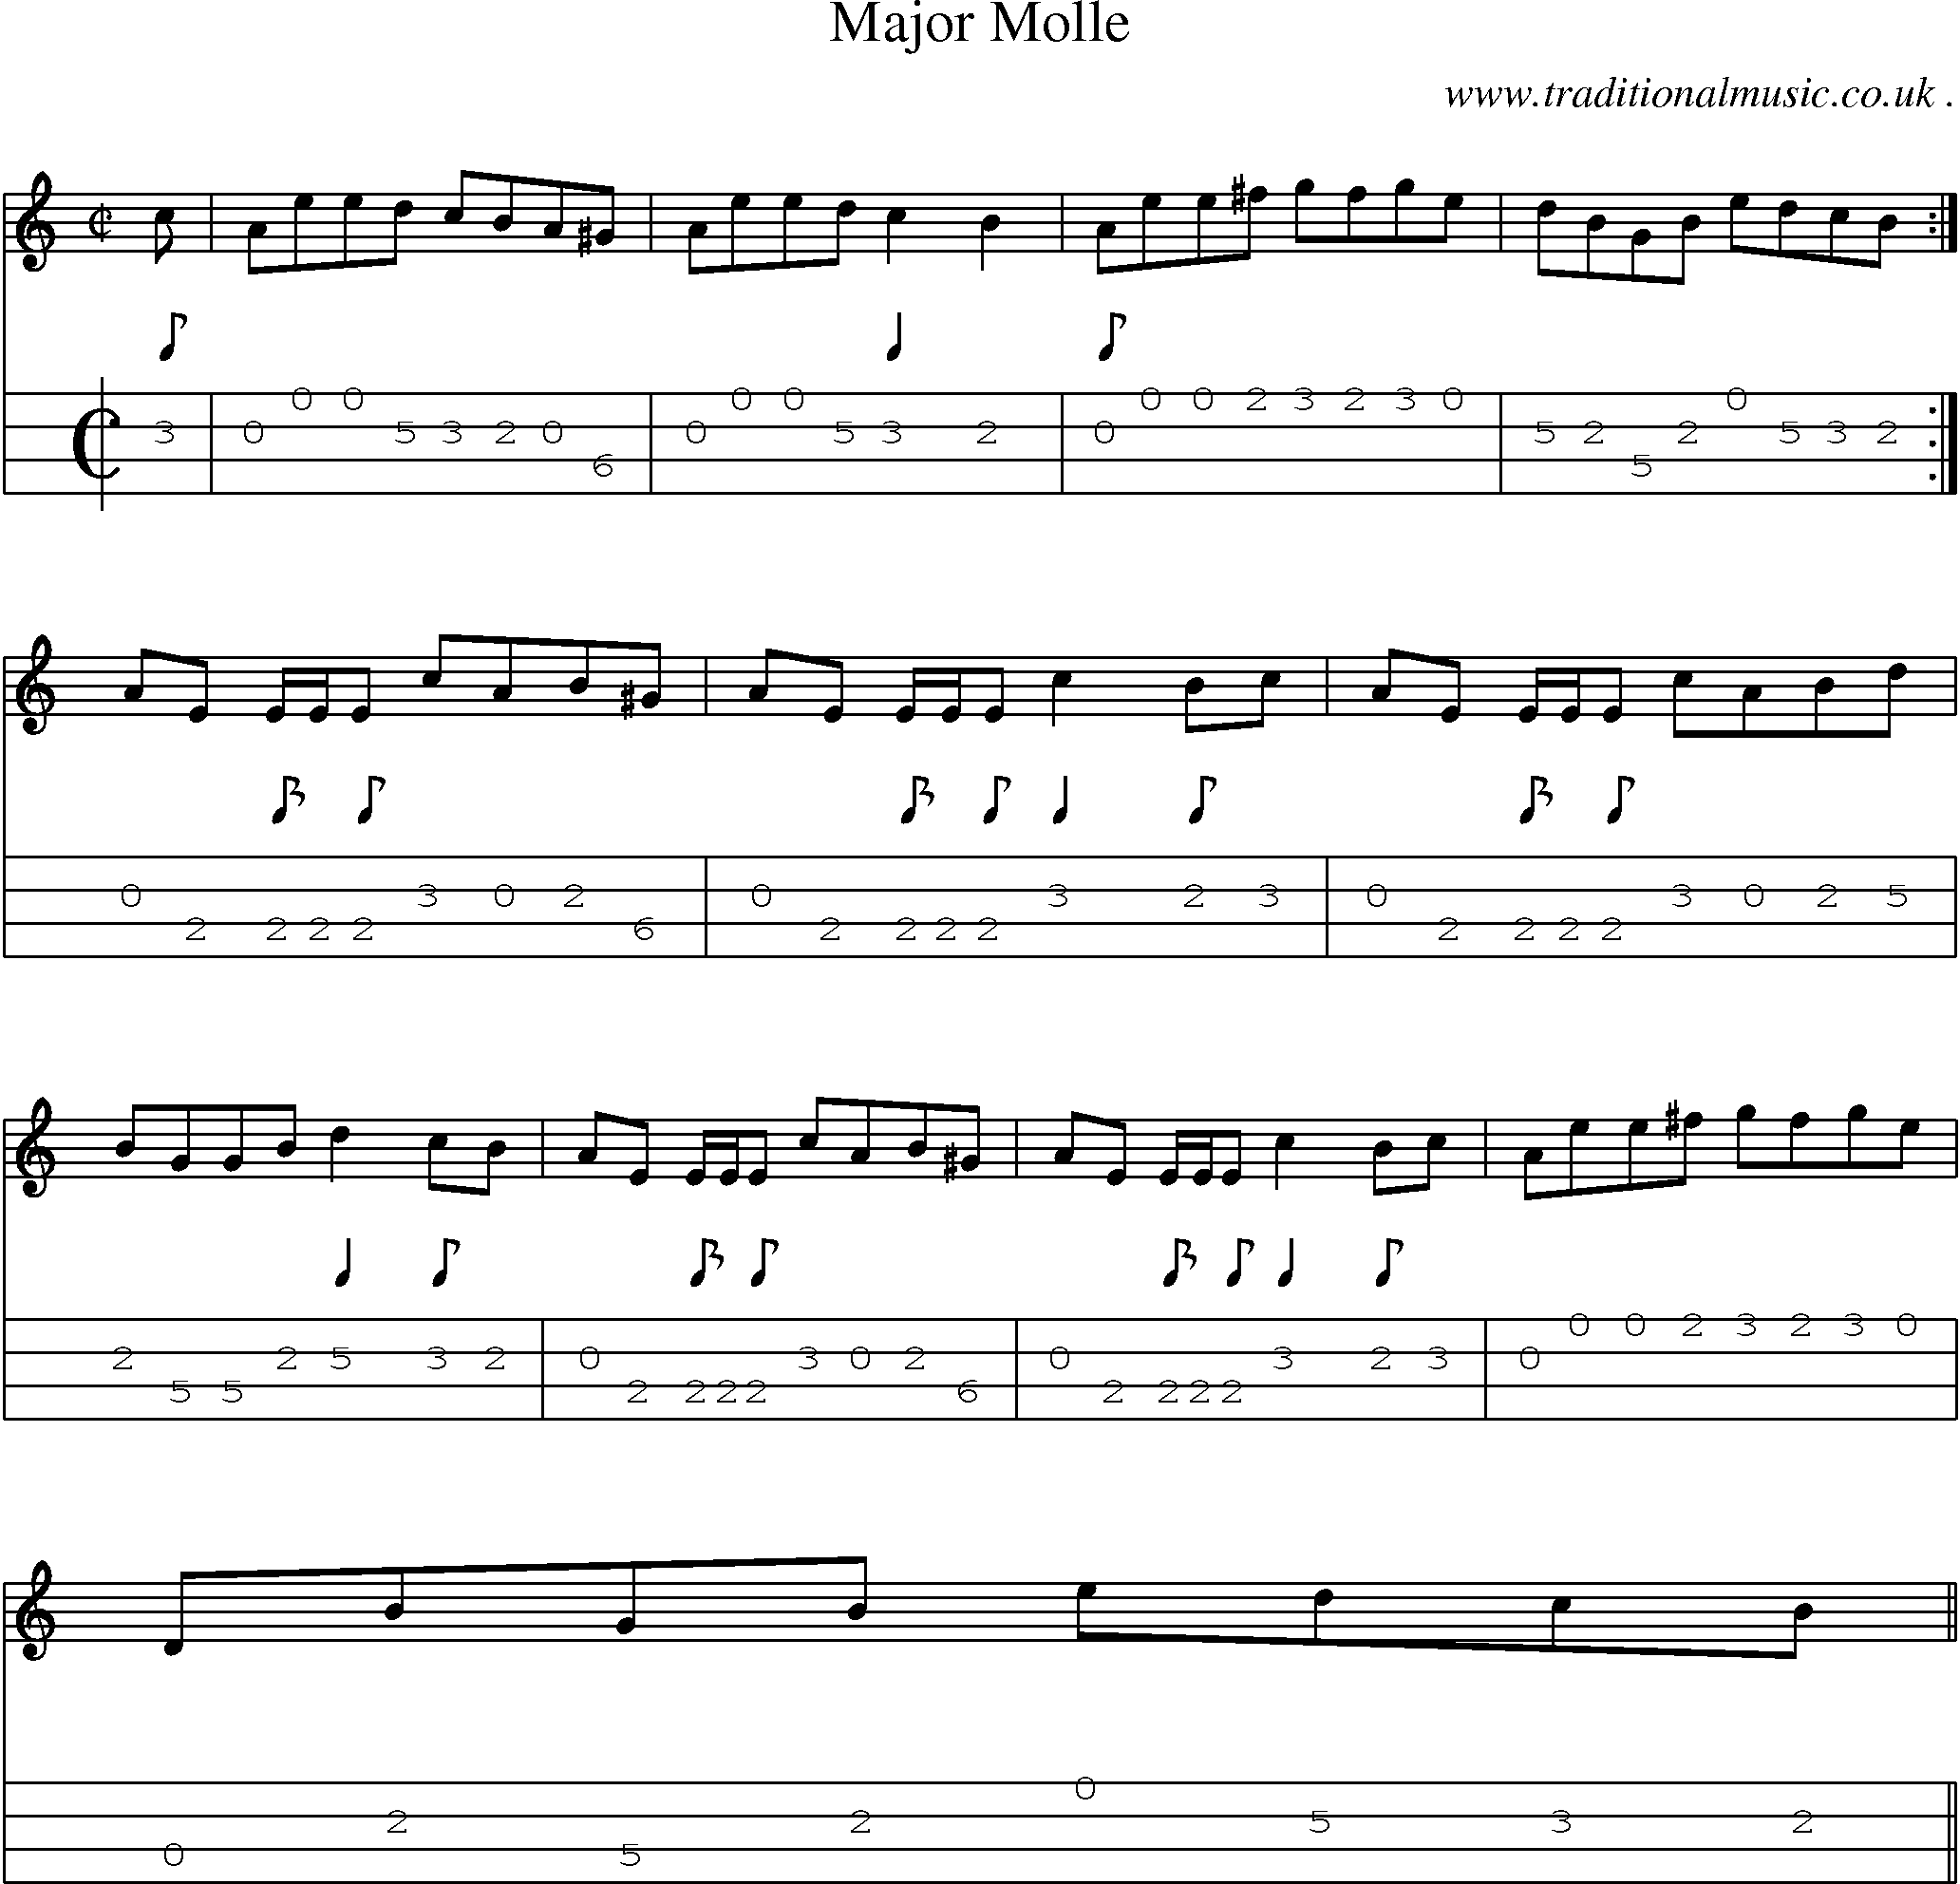 Sheet-music  score, Chords and Mandolin Tabs for Major Molle